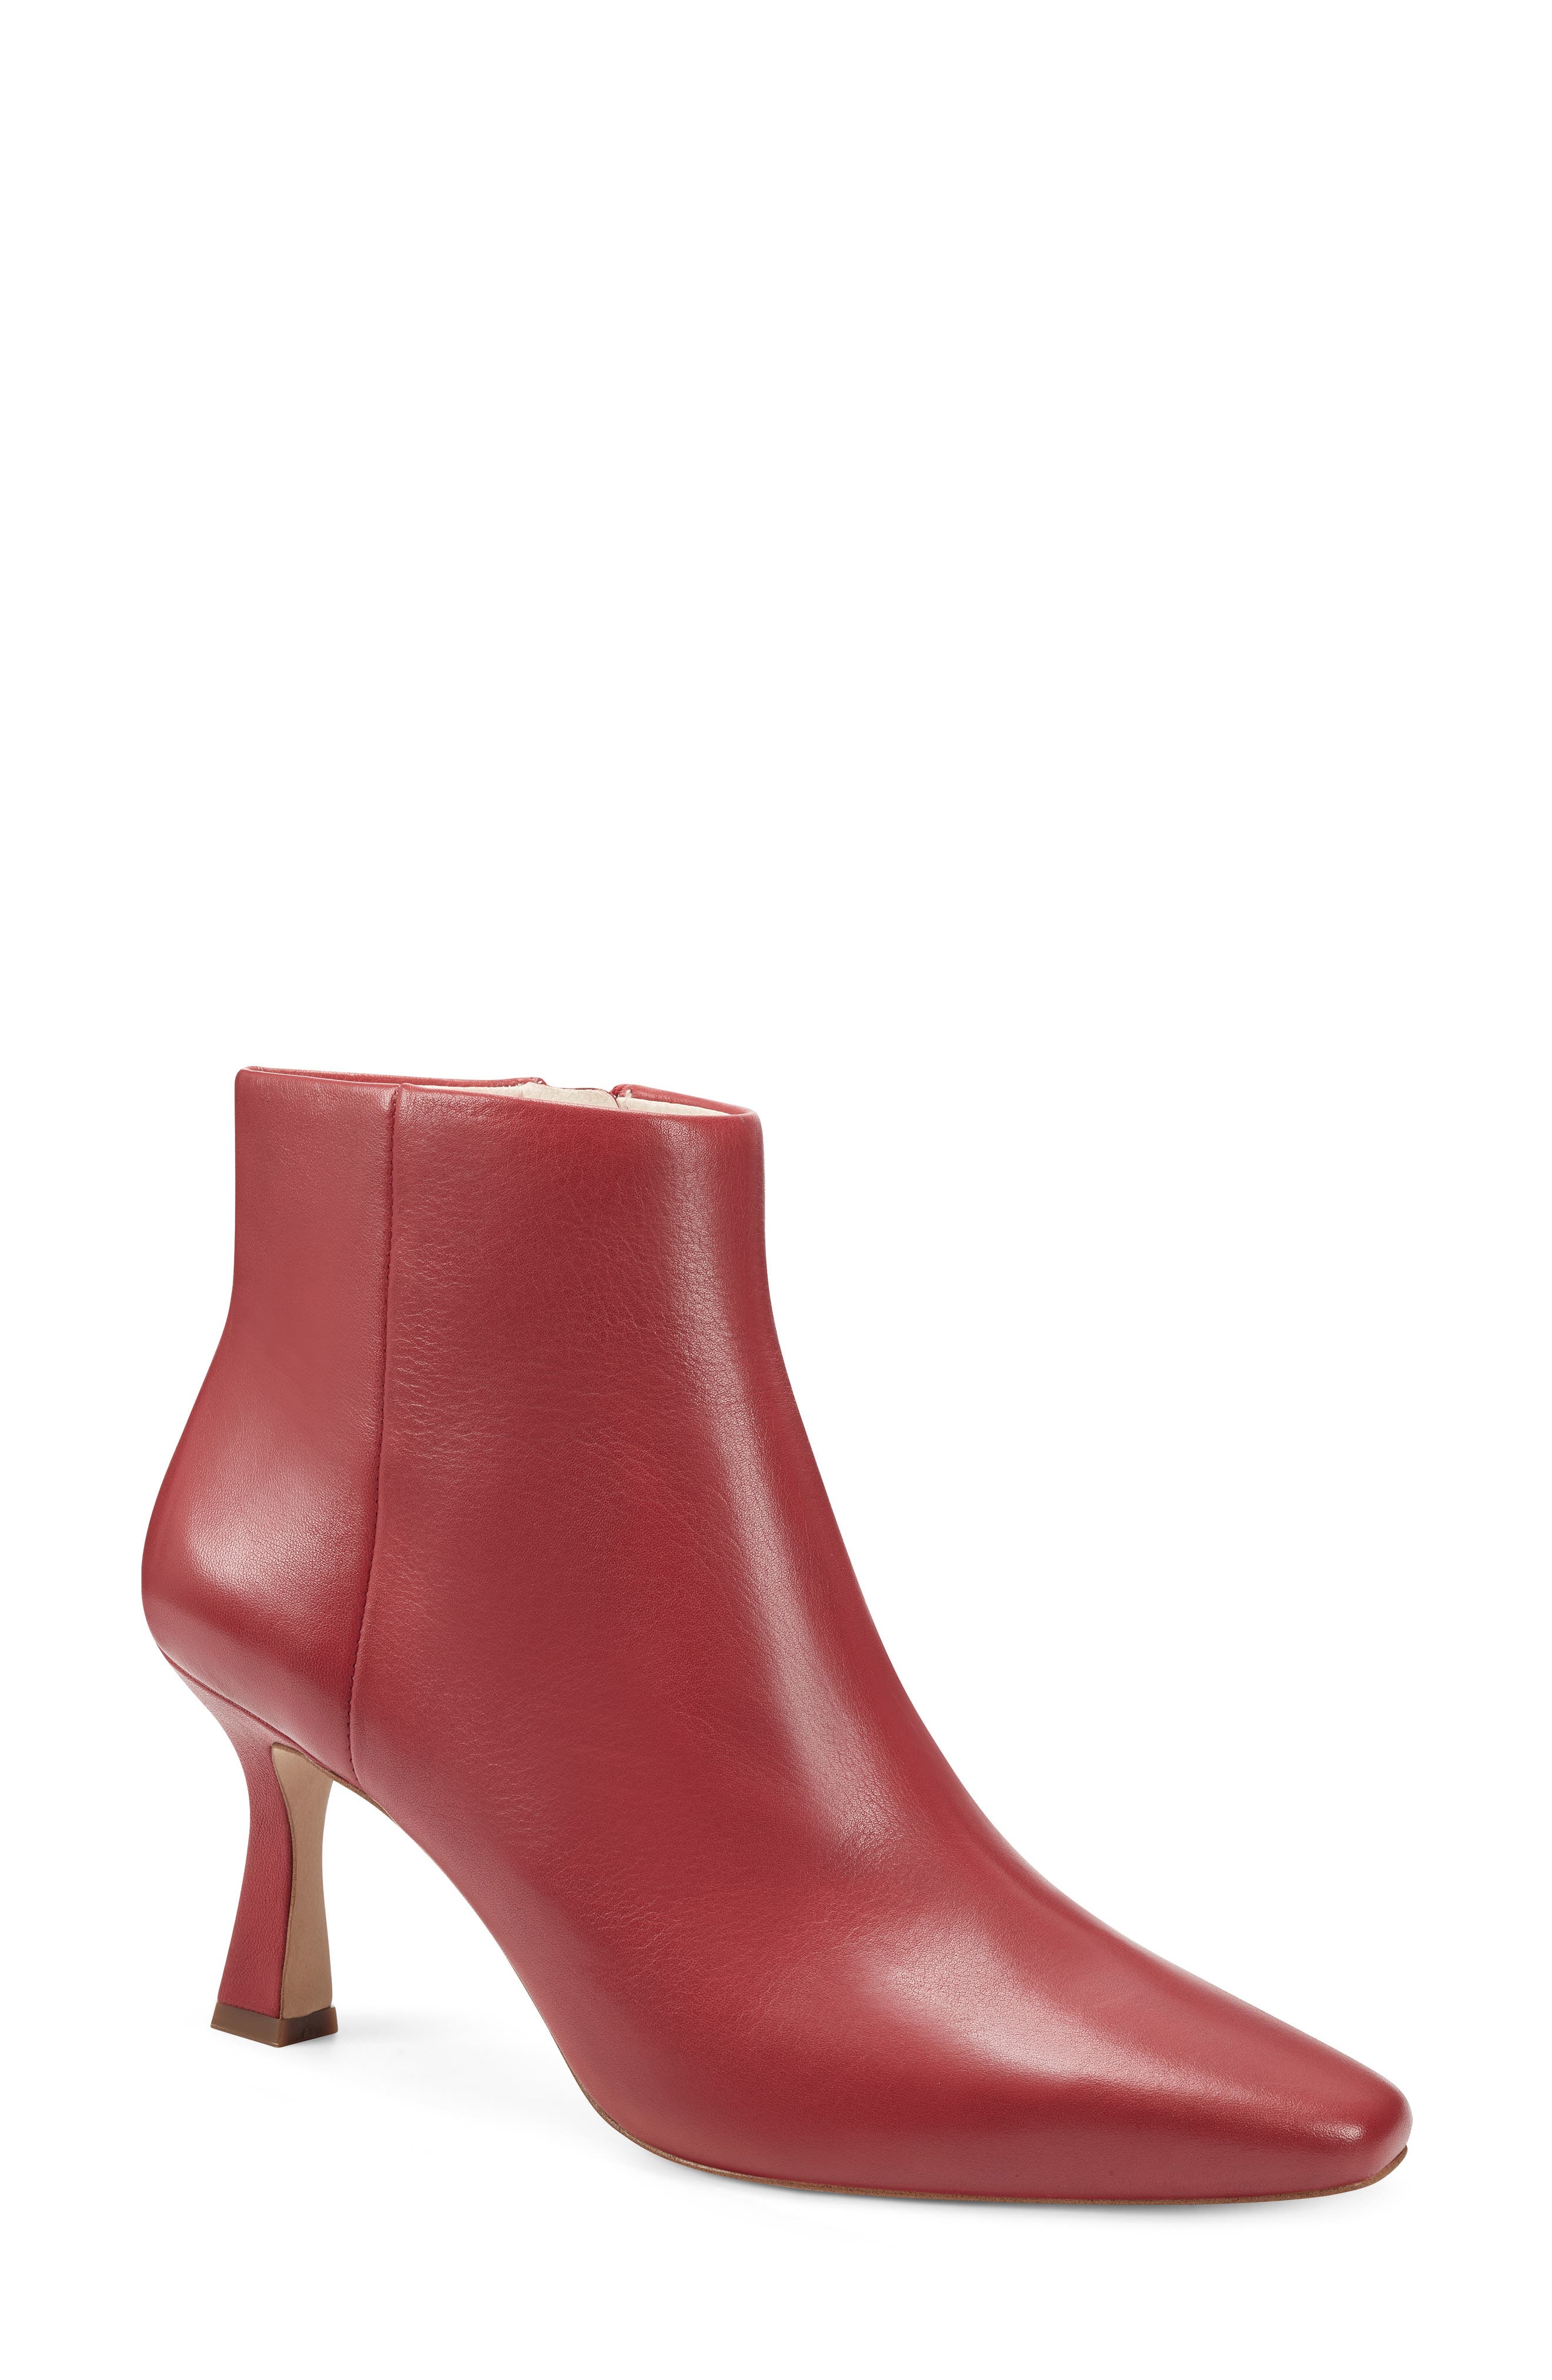 red leather boots womens